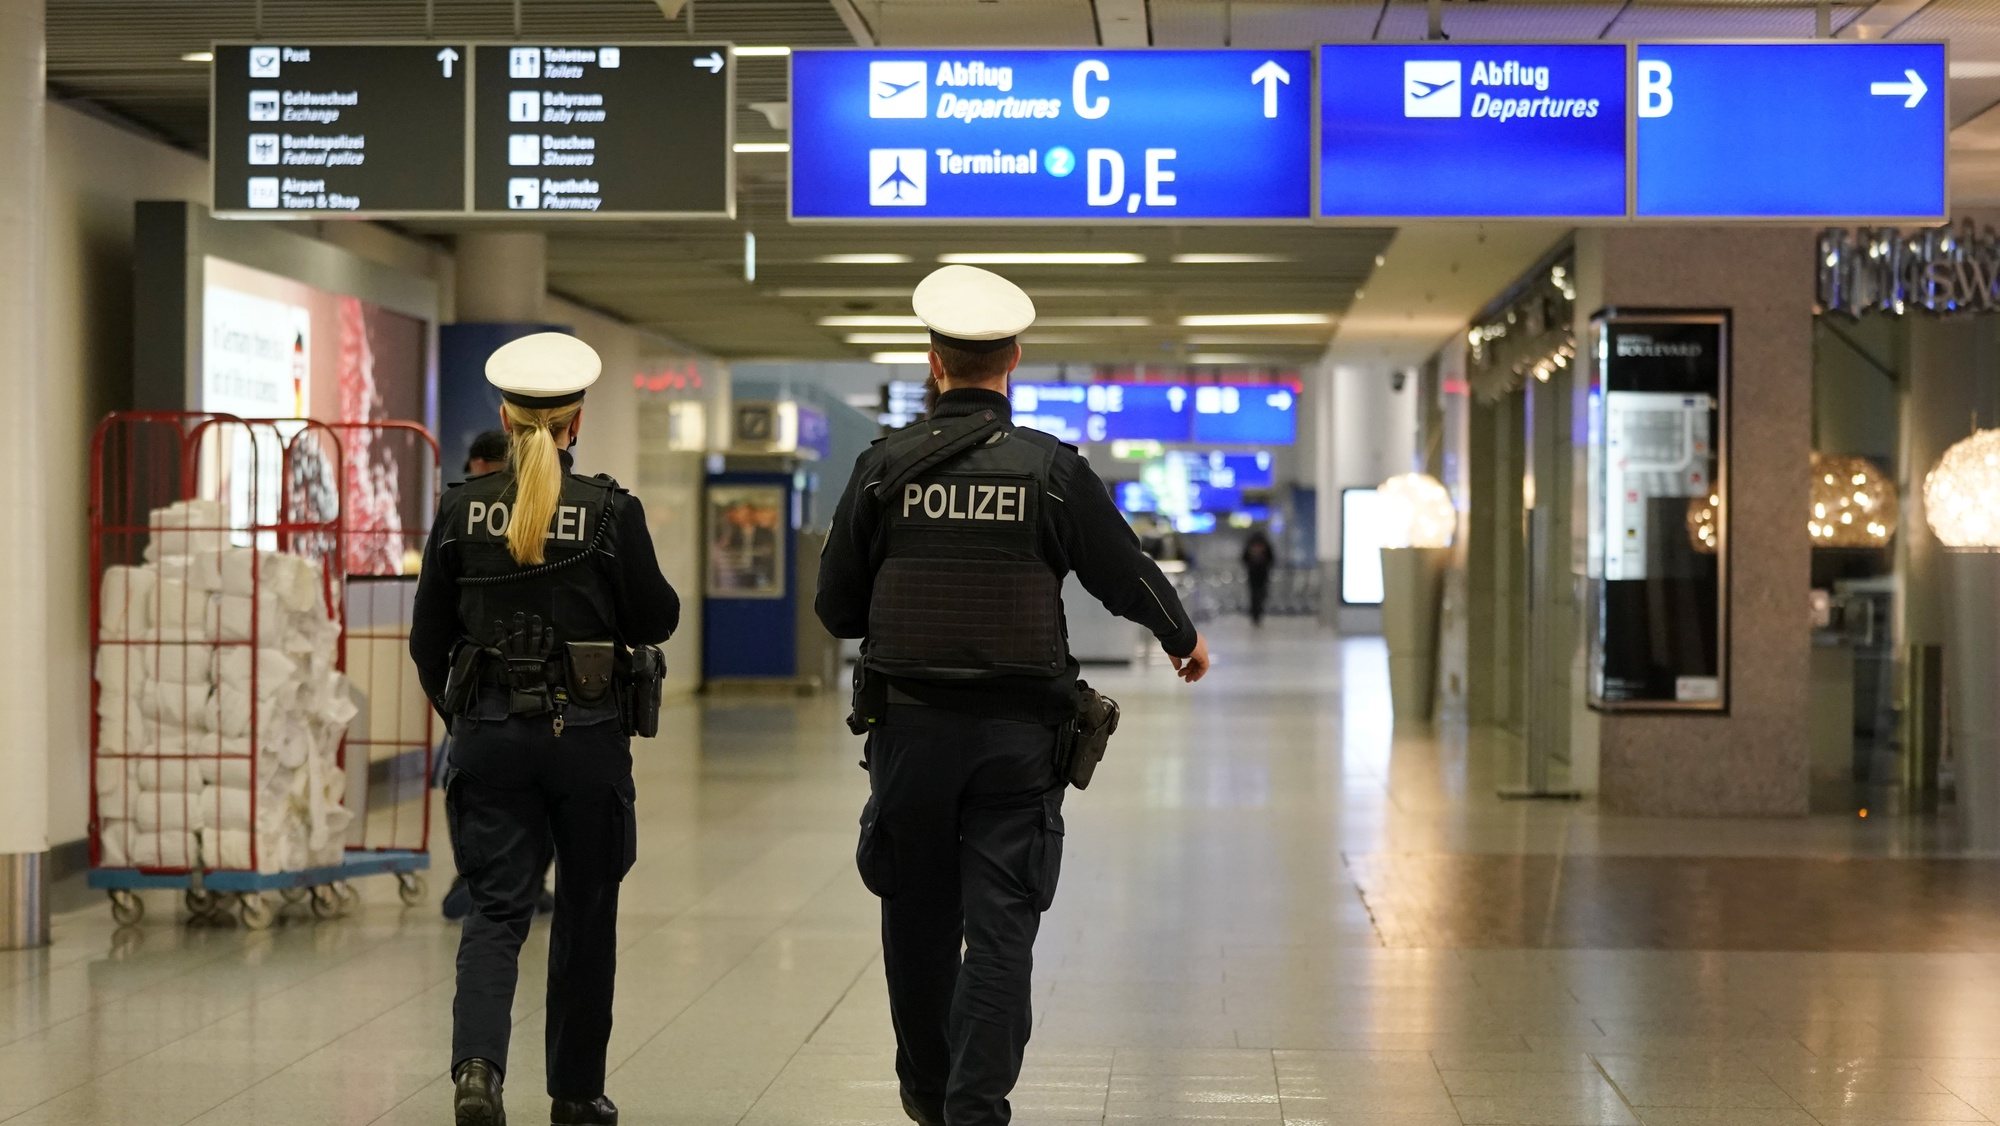 epa08968645 Police officers guard the international airport in Frankfurt am Main, Germany, 27 January 2021. Concerned about a new and more contagious strain of the coronavirus, the German government plans to ban all passenger flights to Germany.  EPA/RONALD WITTEK